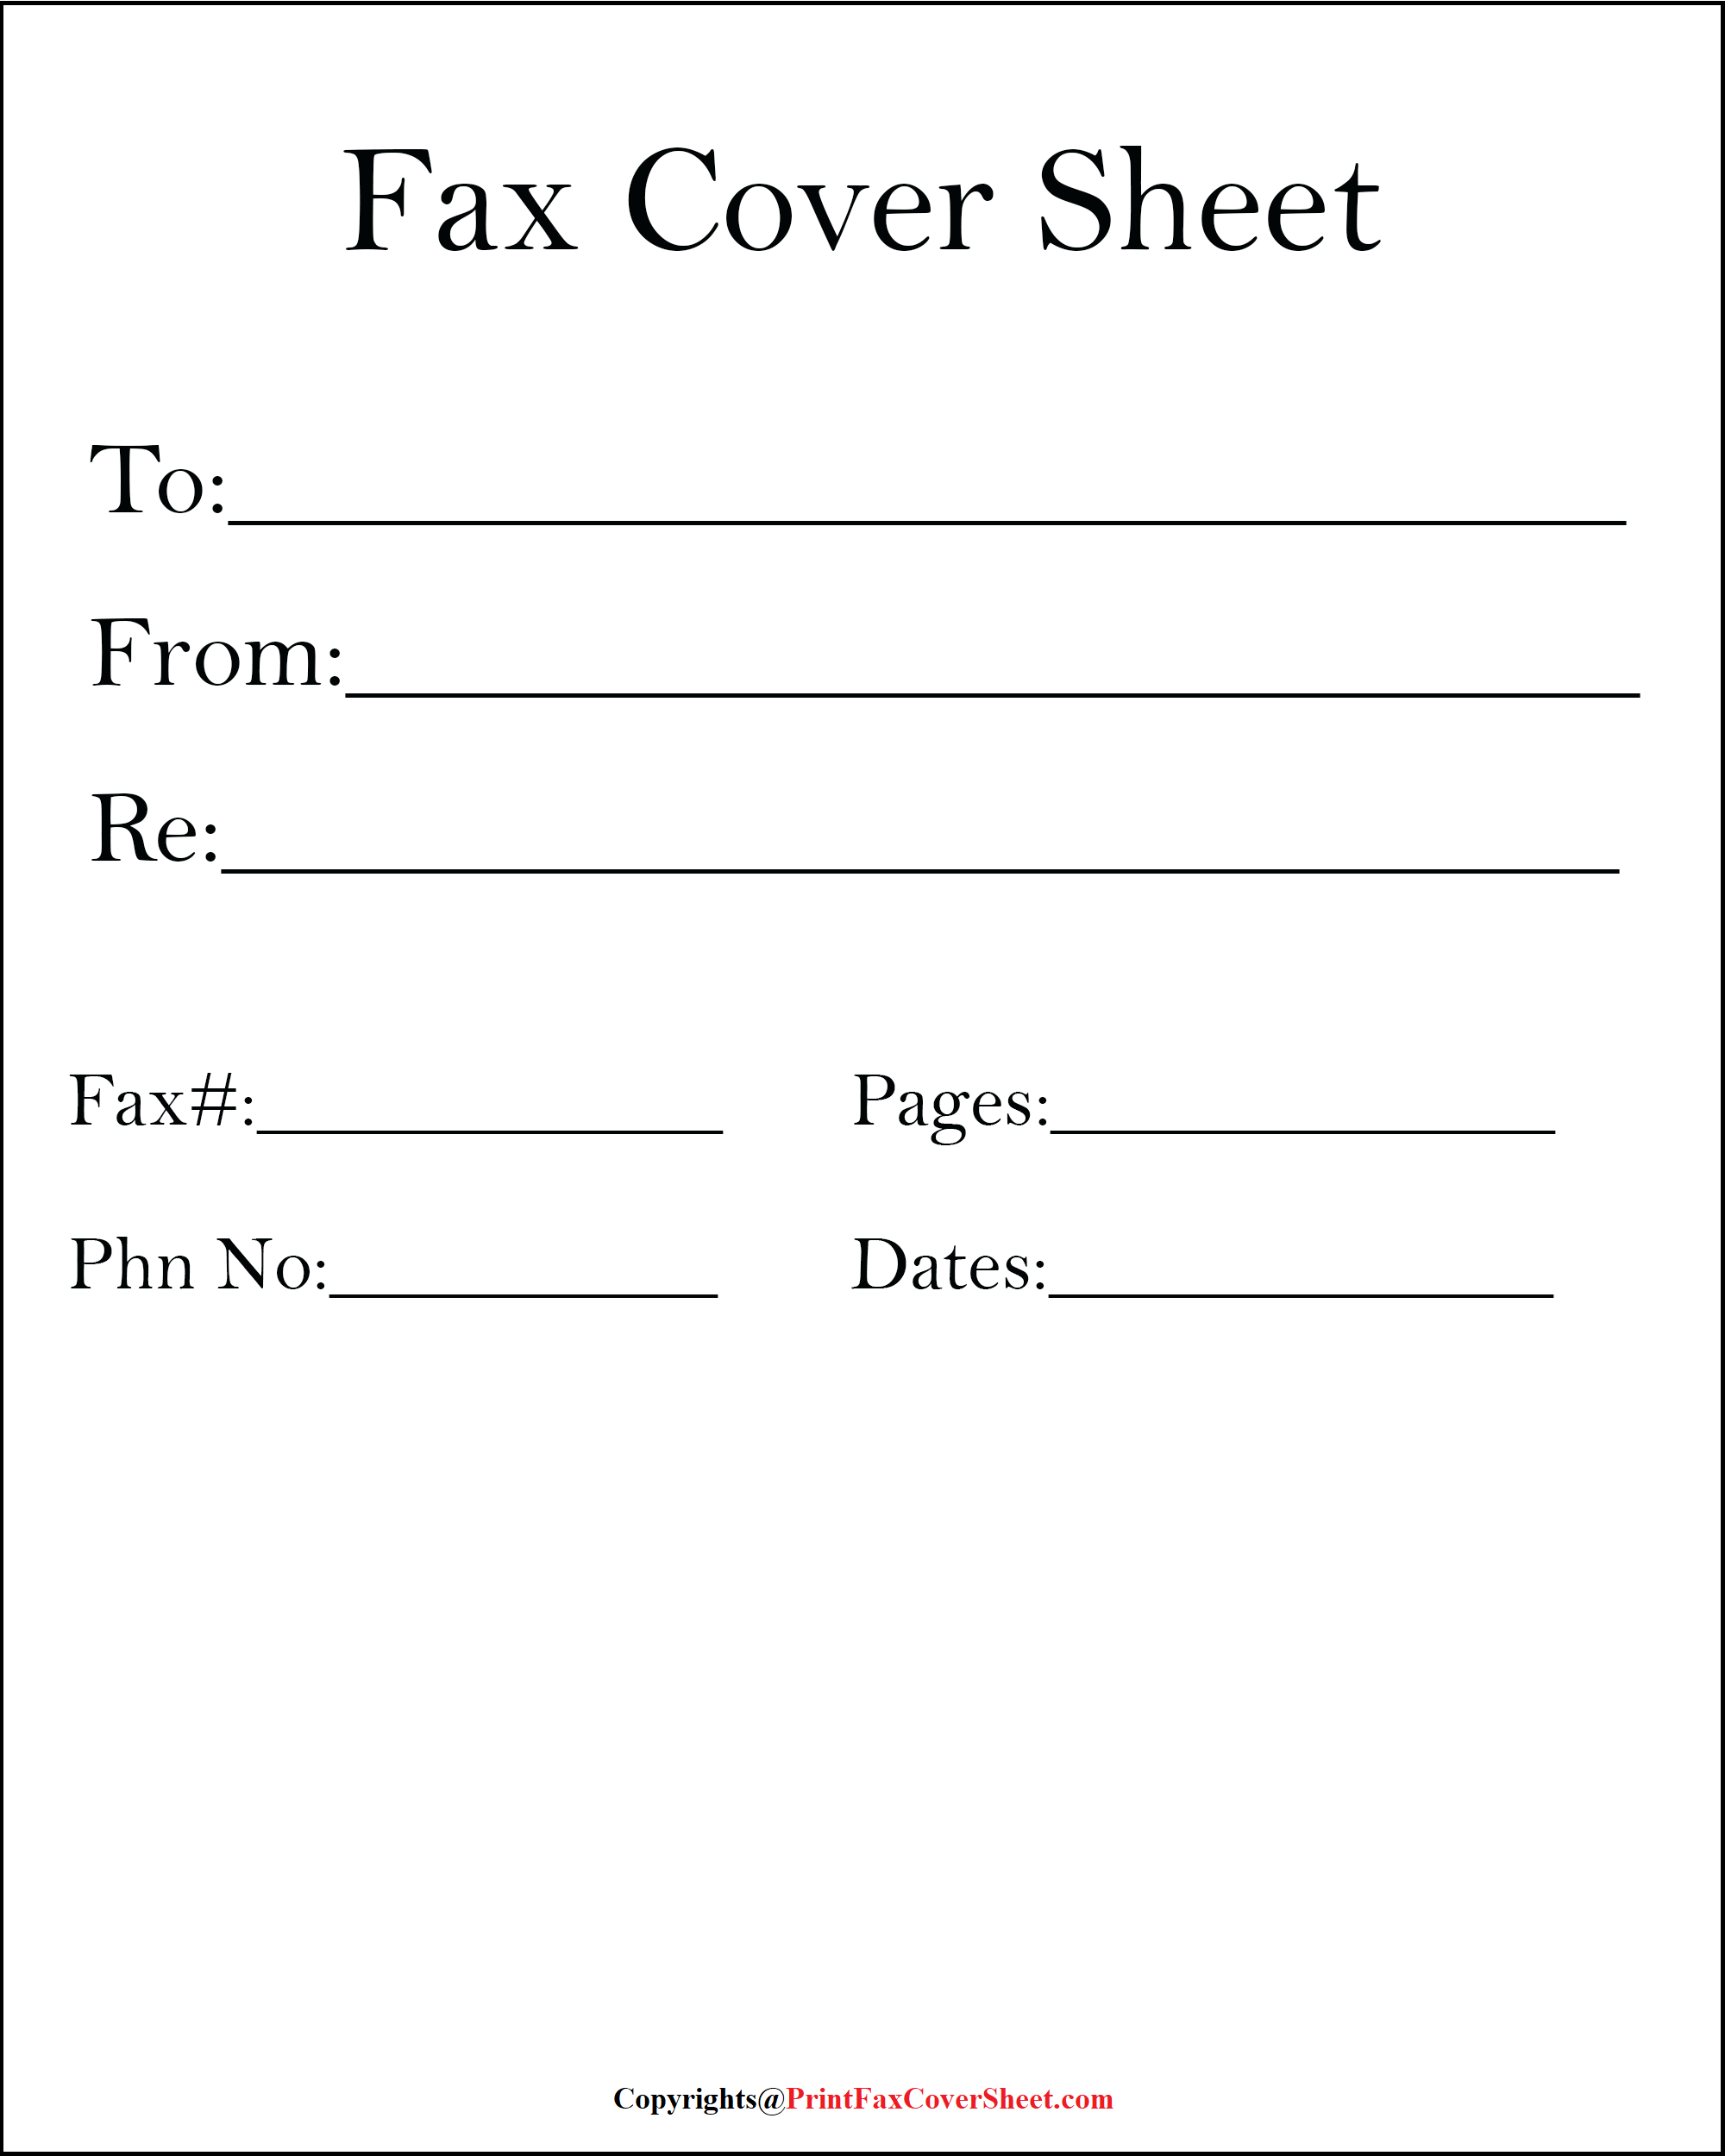 free-printable-blank-fax-cover-sheet-template-pdf-fax-cover-sheet-template